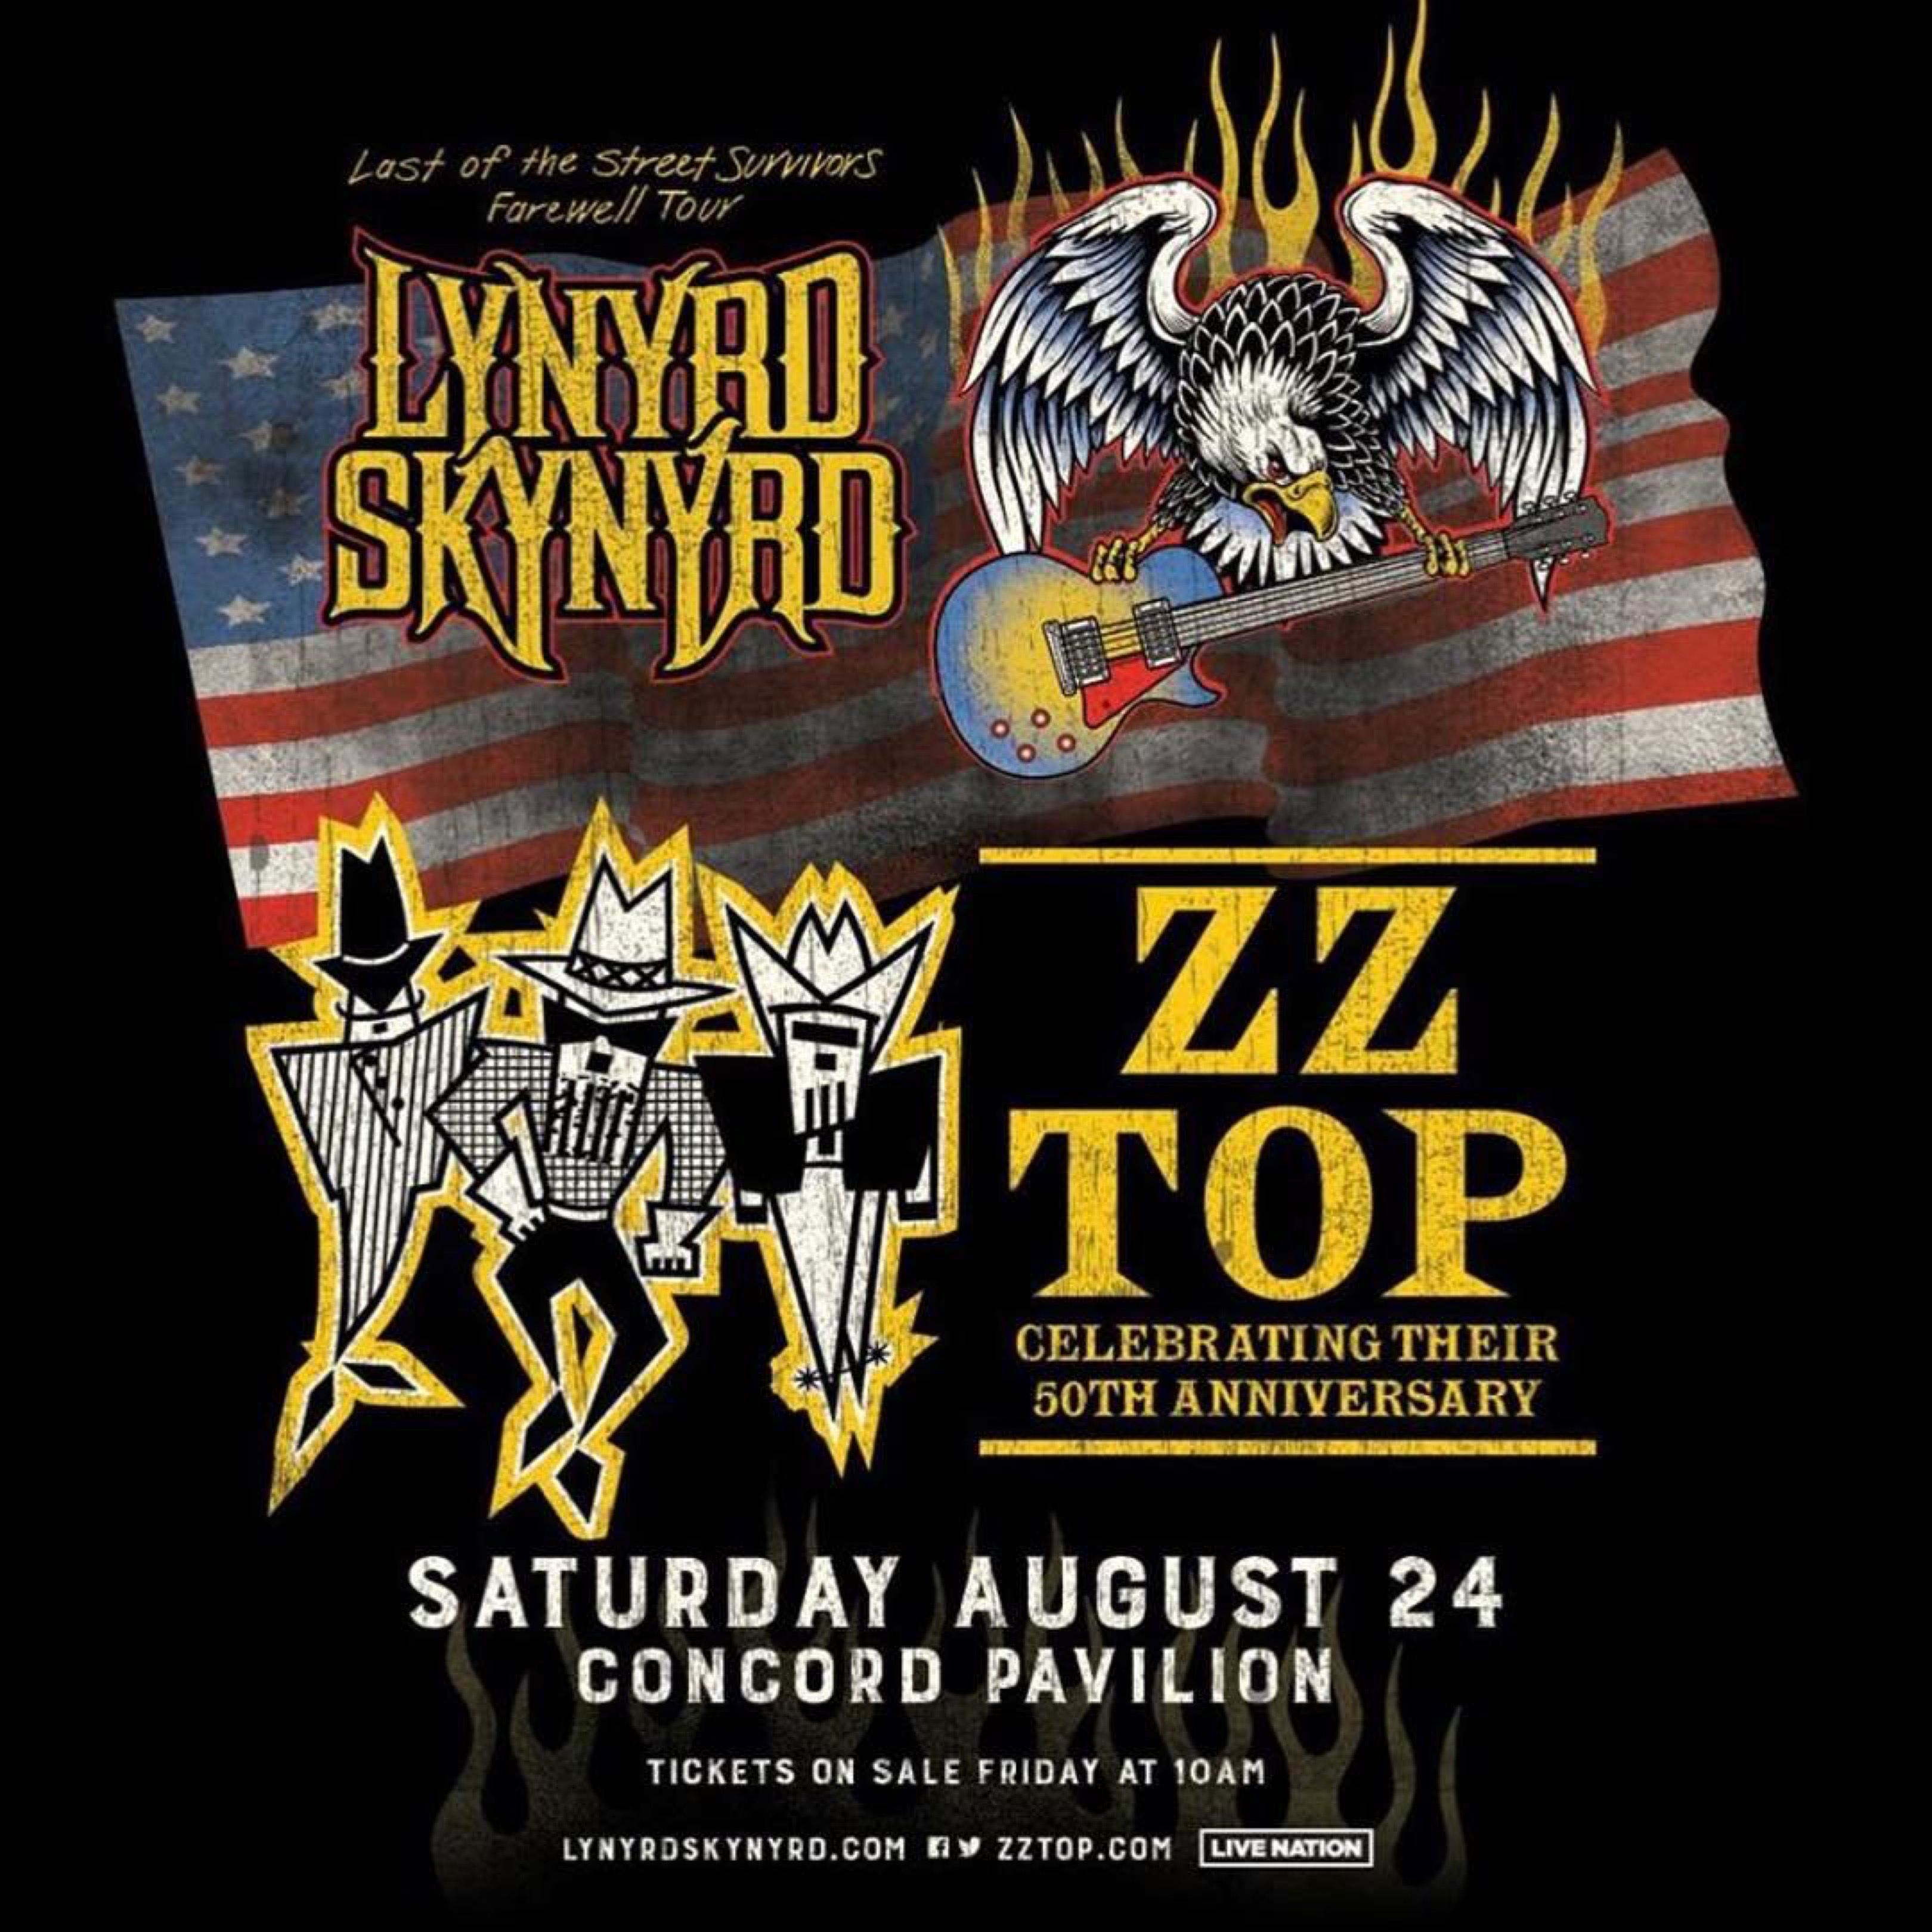 CLICK HERE TO PURCHASE TICKETS FOR LYNYRD SKYNYRD & ZZ TOP AT THE